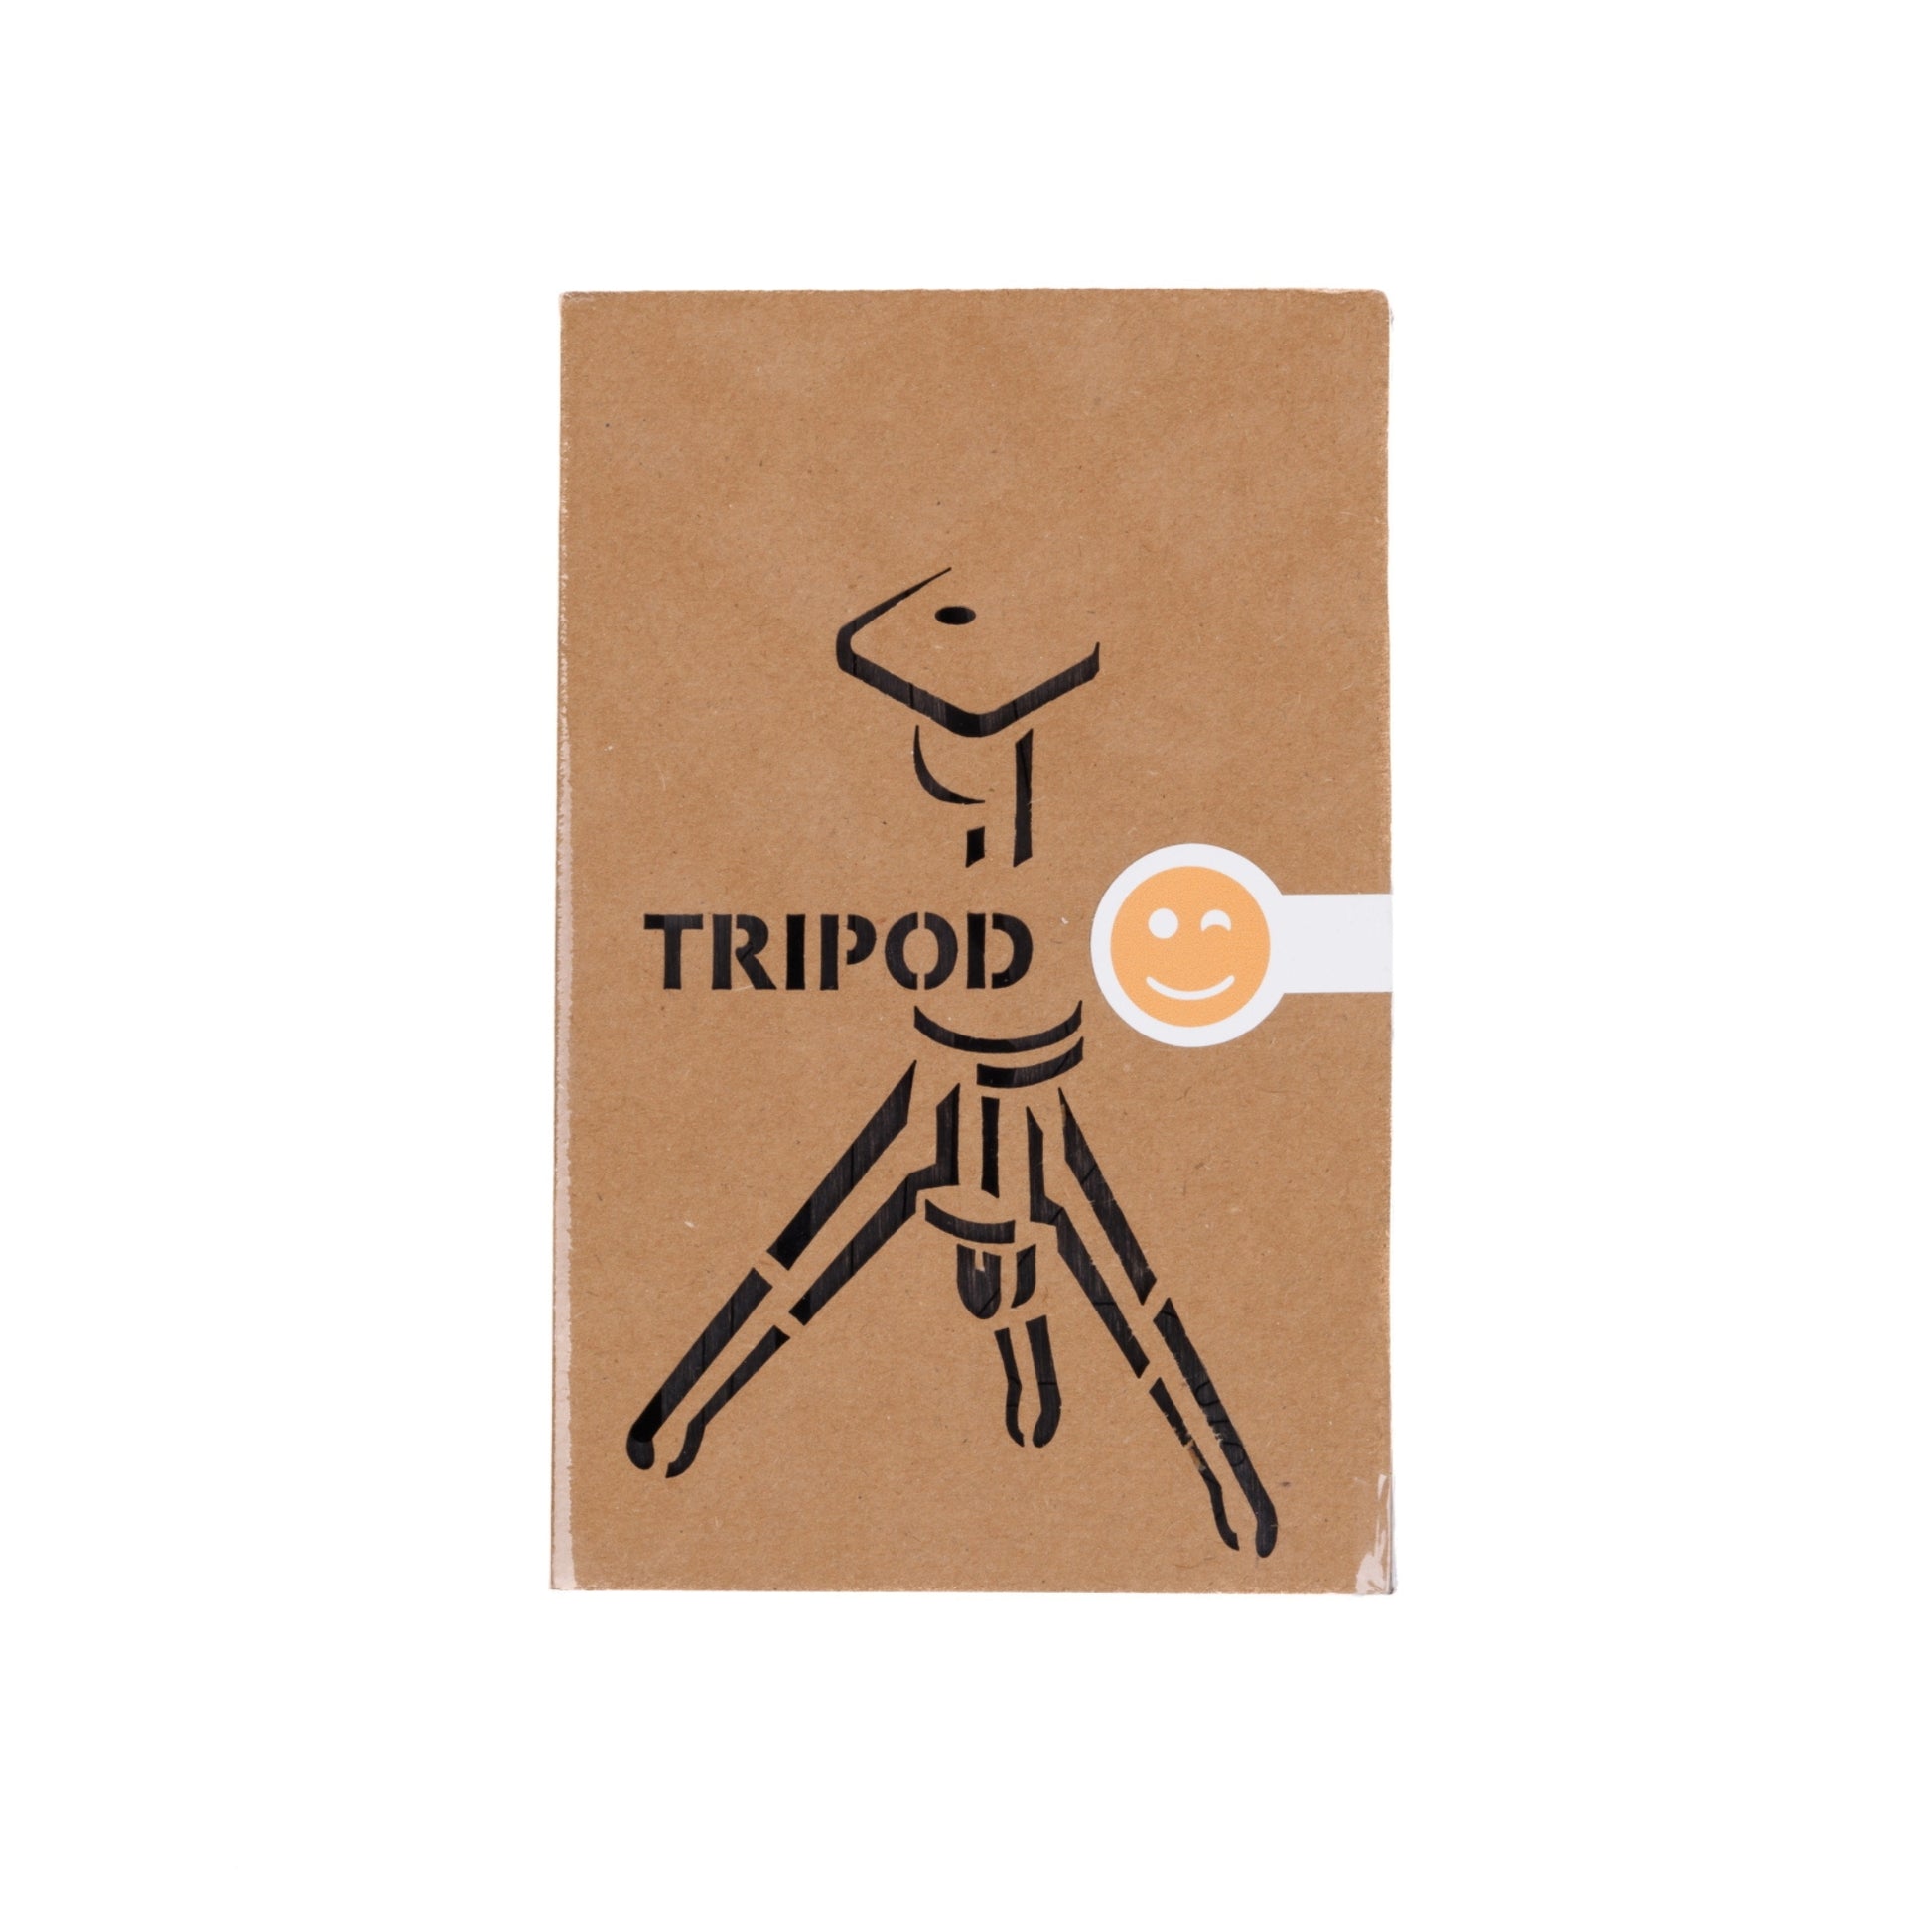 A Decorative DIY Stained Brown plywood tripod kit for self-assembly. Works with any Jollylook instant film camera.